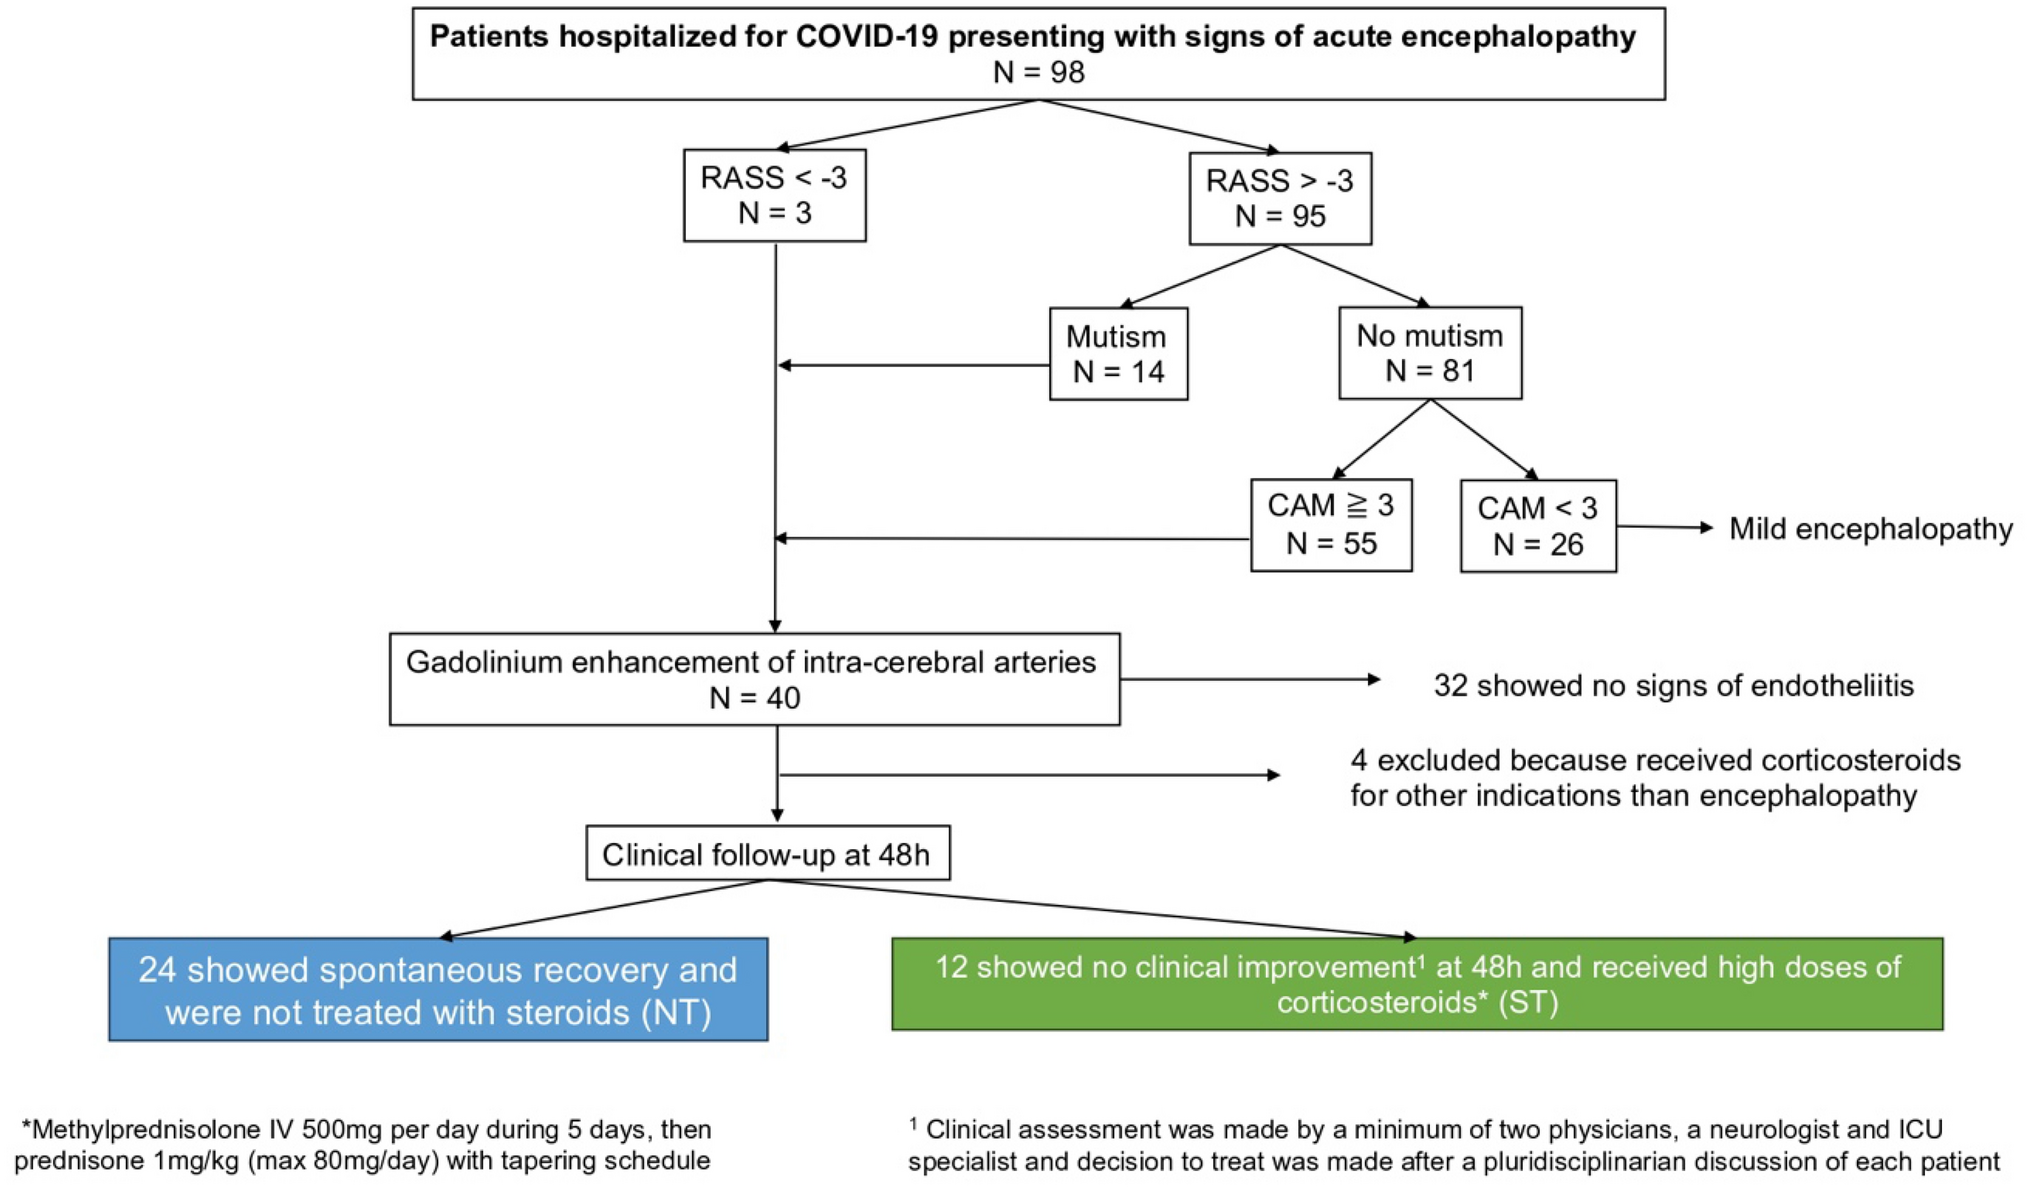 High-dose glucocorticoids in COVID-19 patients with acute encephalopathy: clinical and imaging findings in a retrospective cohort study